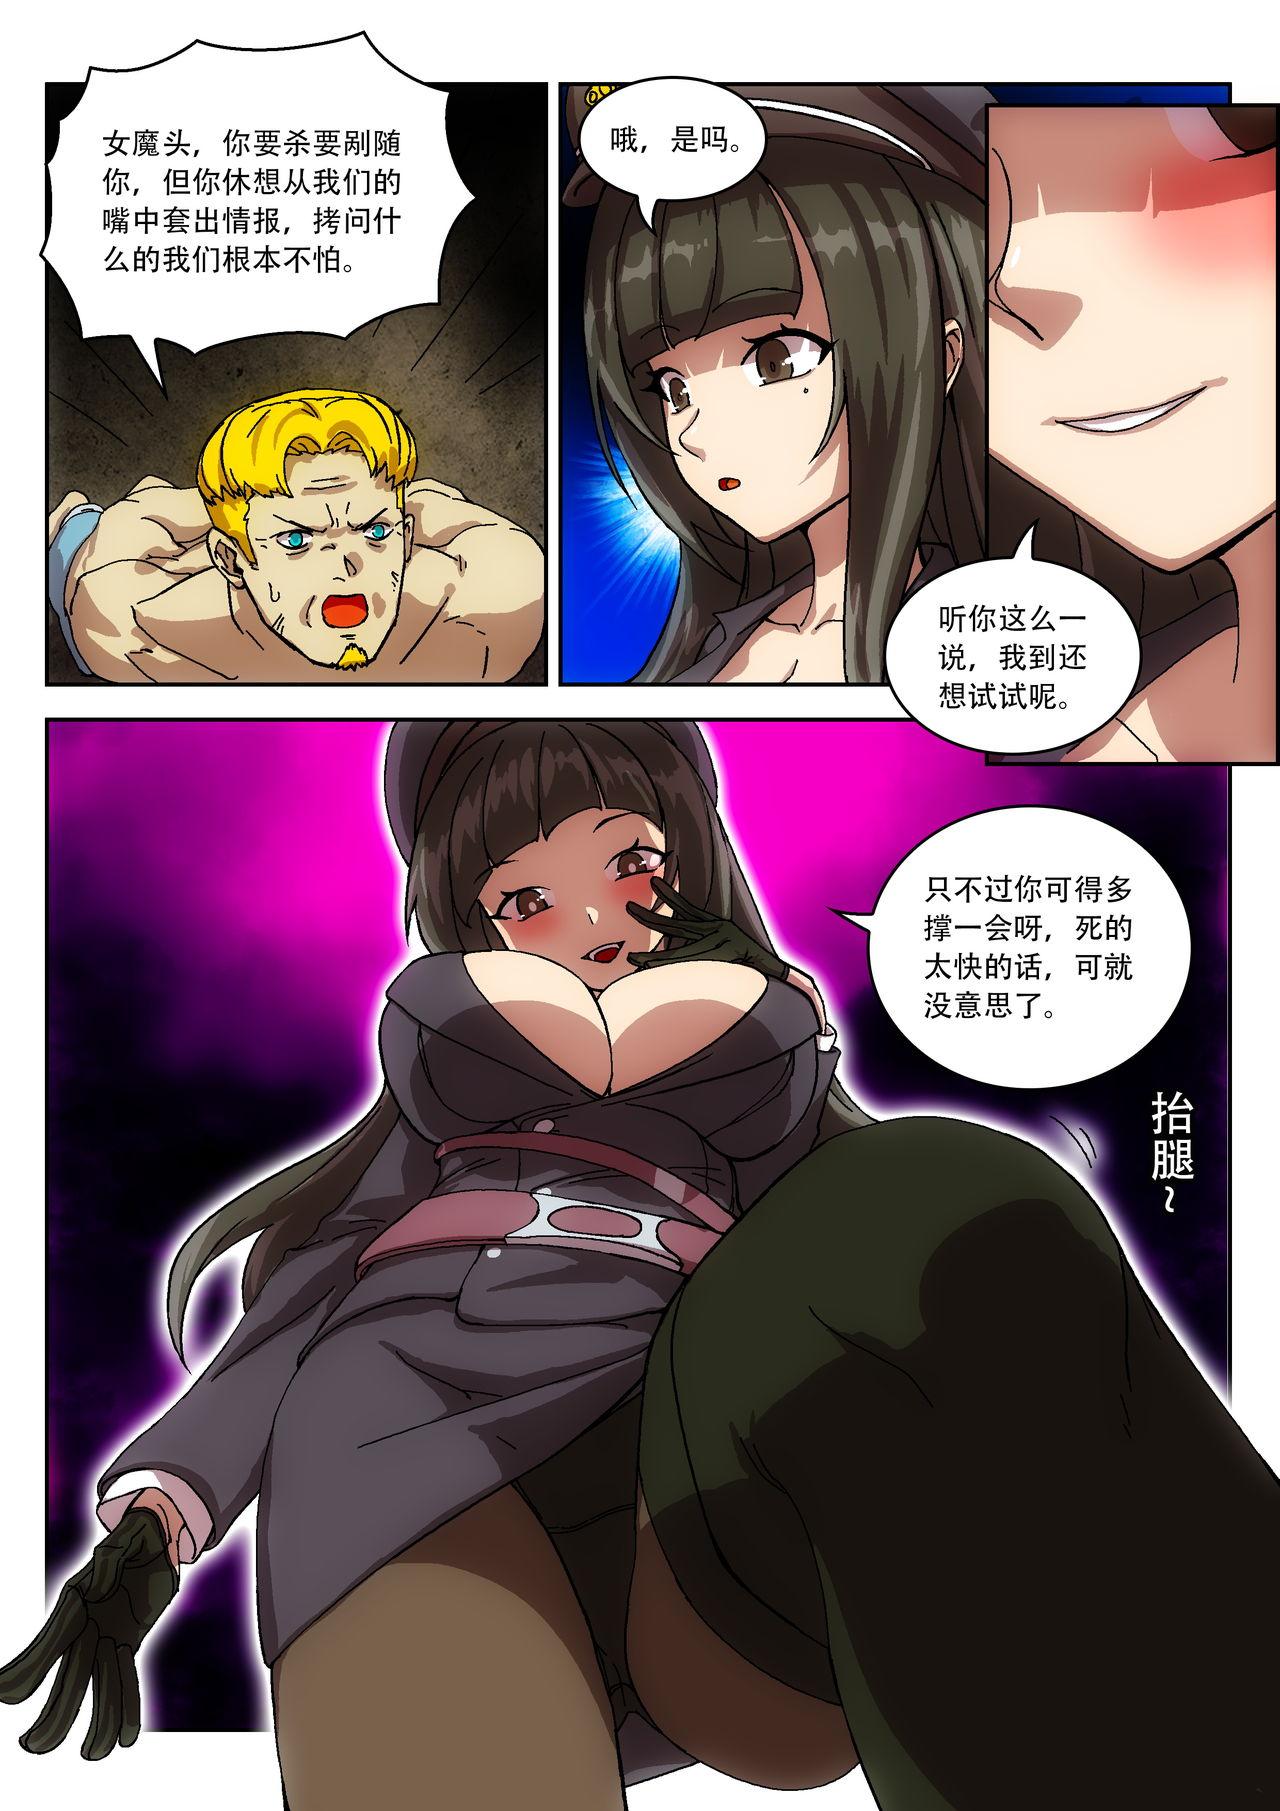 [Weixiefashi] Empire executioner Alice-sama's thigh-high boots trampling crushing torturing session full colour [帝国处刑官爱丽丝大人的长靴踩杀拷问][全彩] 2